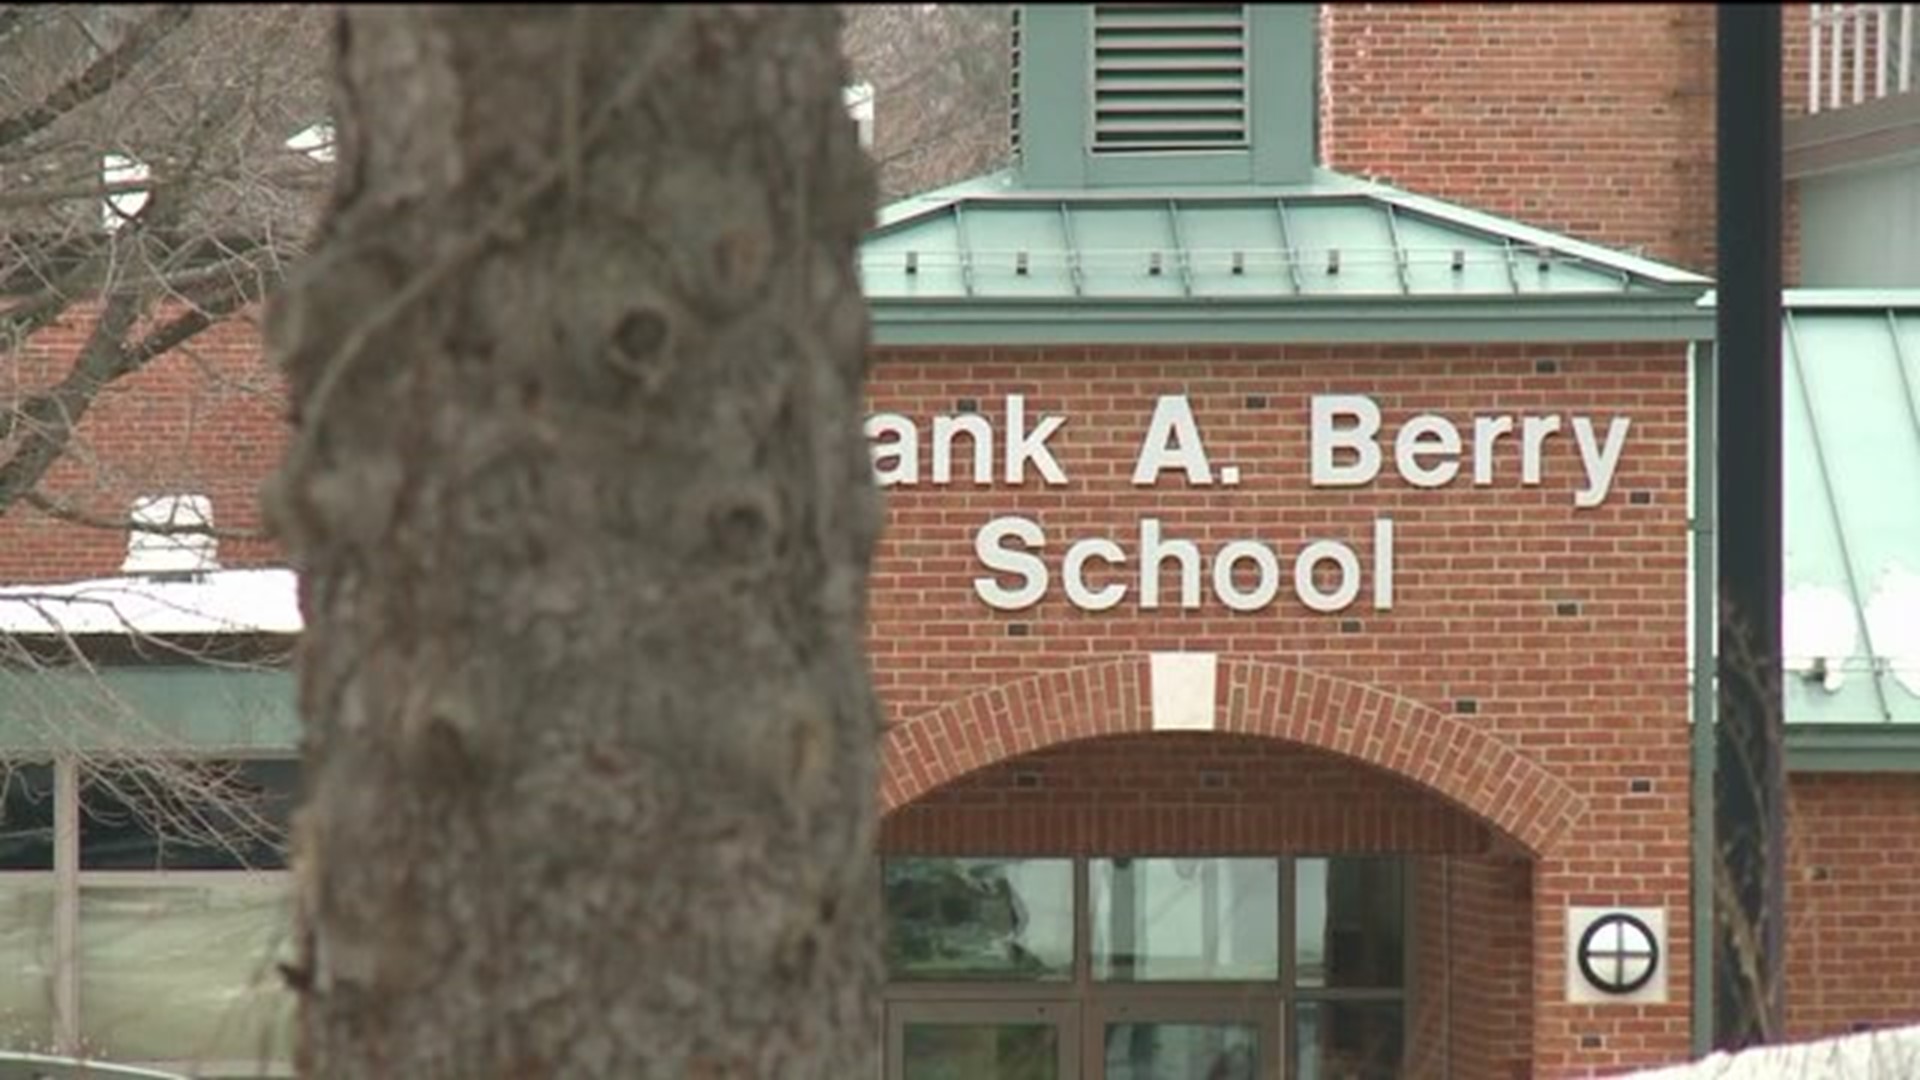 Former Bethel teacher arrested for inappropriate contact with children